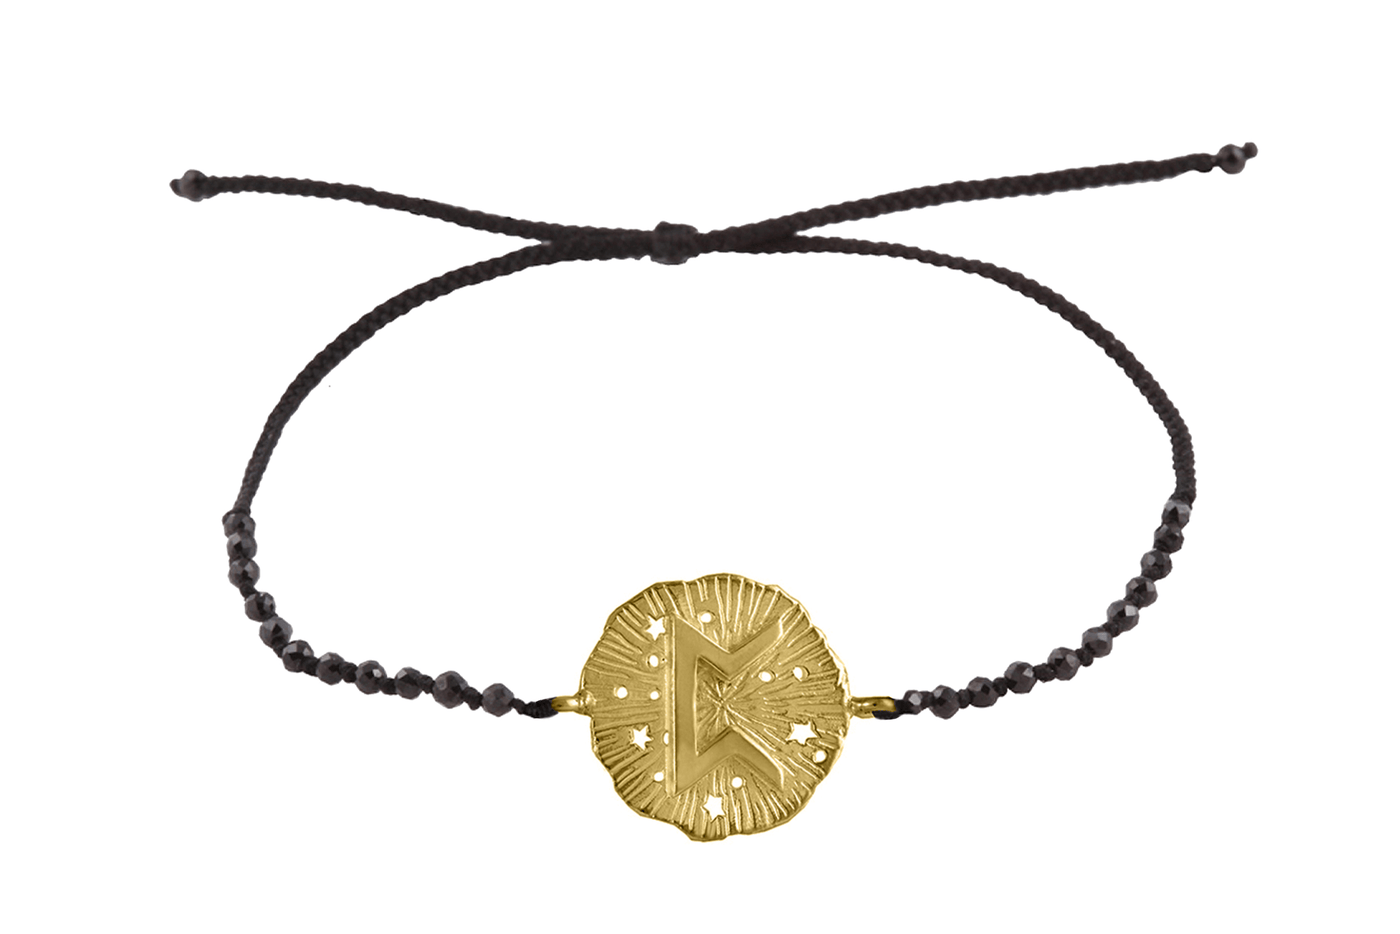 Runic medallion amulet Perth bracelet with beads. Gold plated